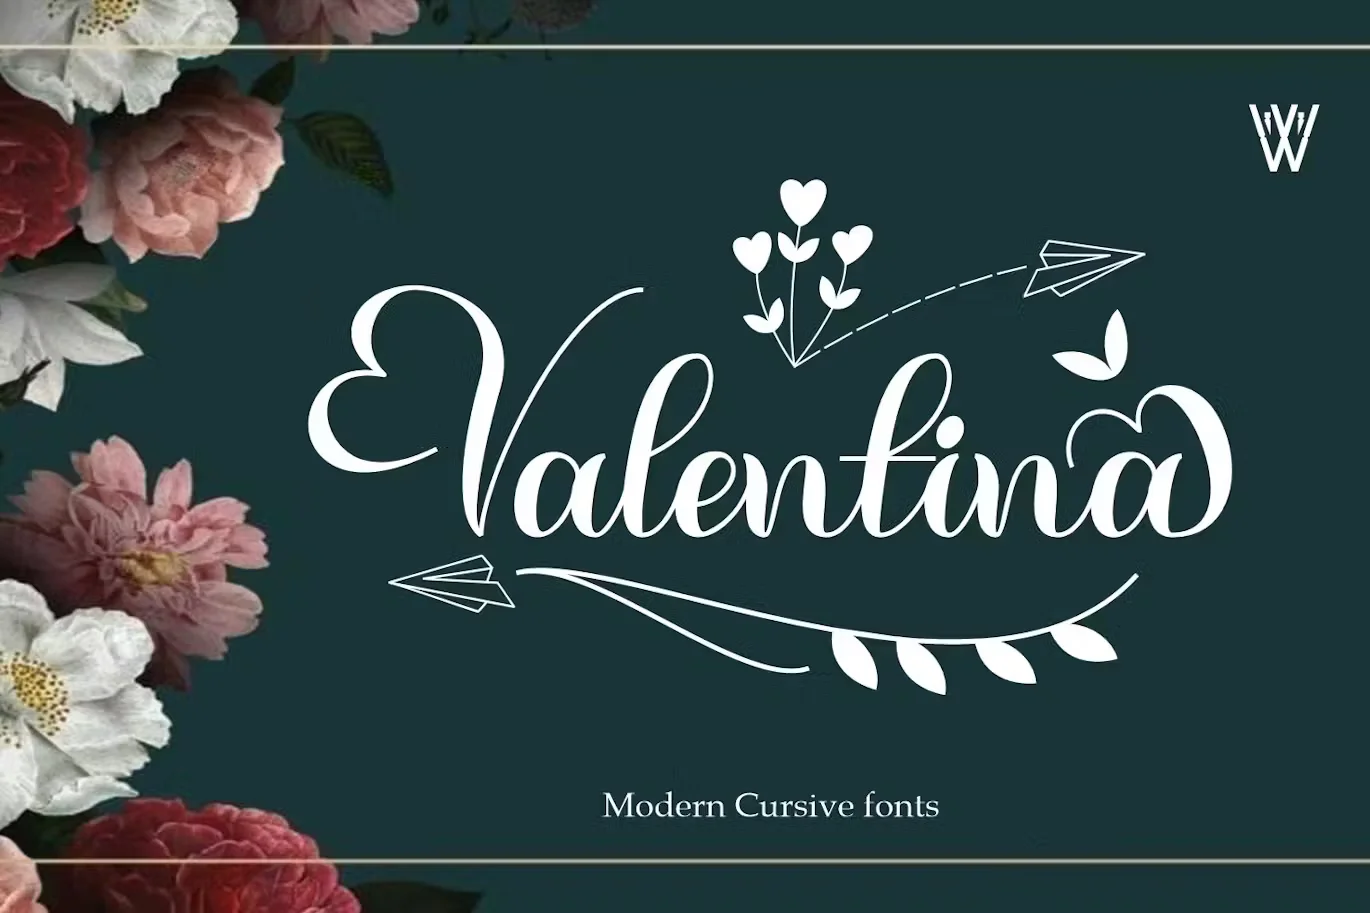 The image features the name "Valentina" written in a stylish cursive font, commonly used for feminine tattoos.